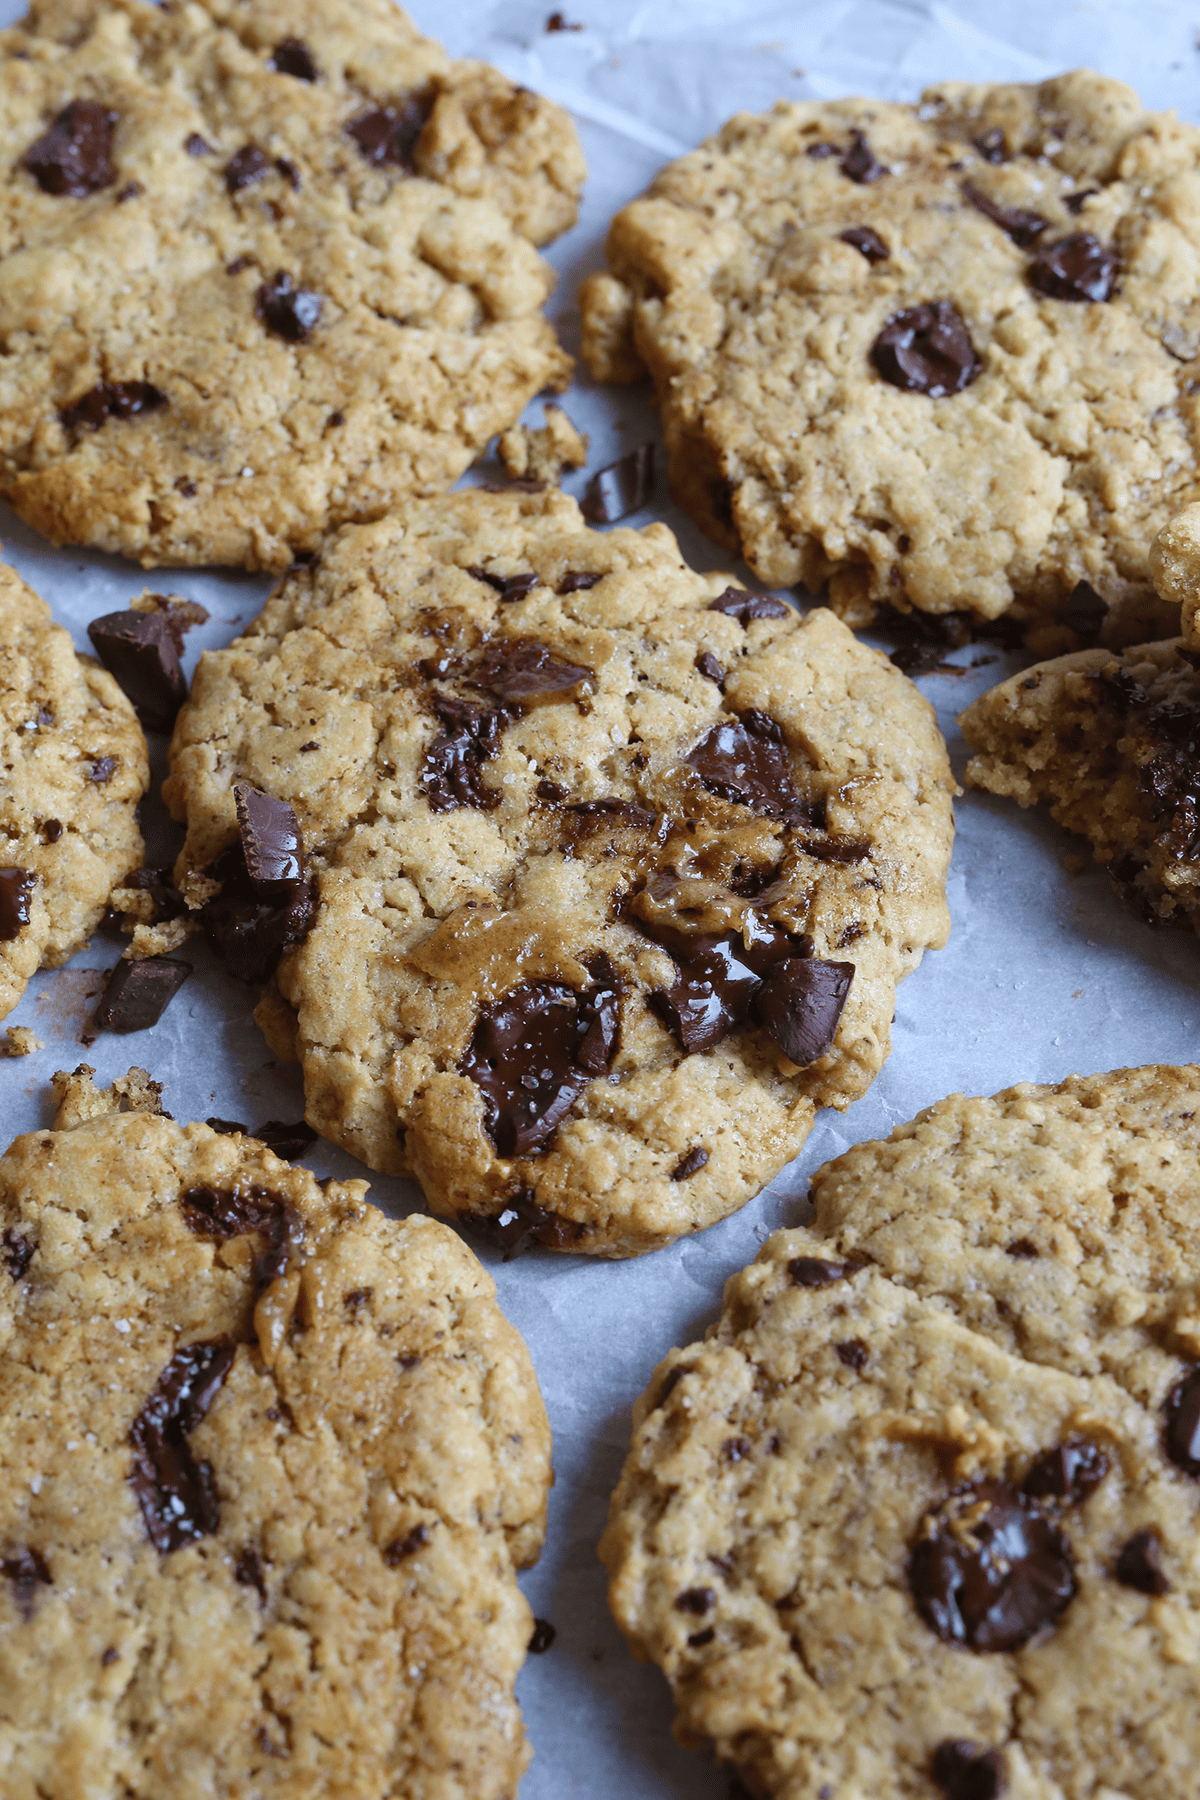 Only 1 bowl required for these vegan Soft Chocolate Chunk Caramel Cookies! They are moist and chewy, sweet and indulgent.